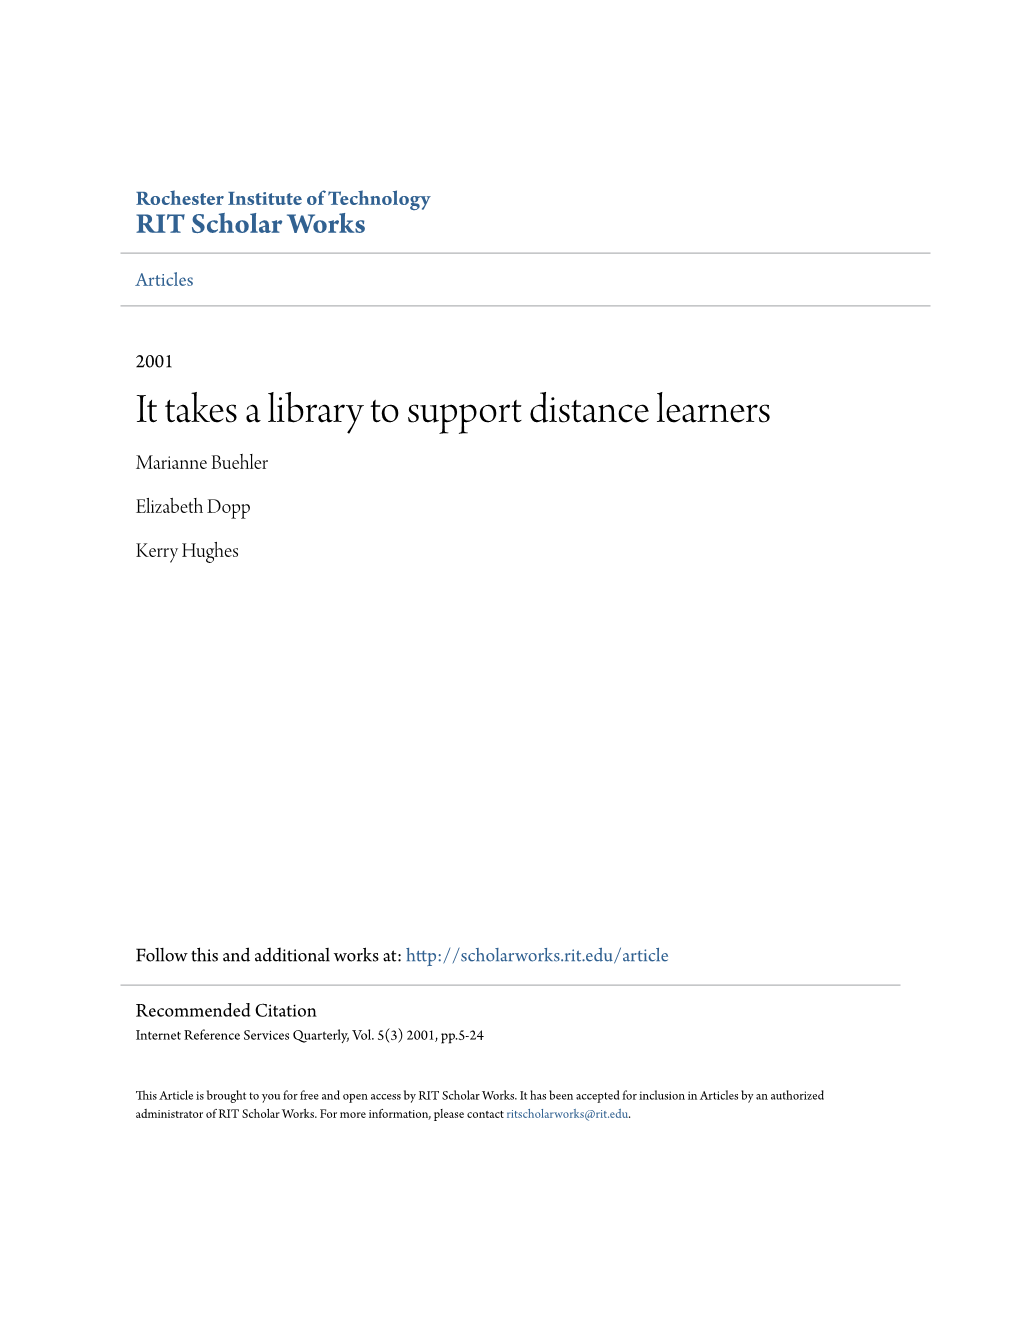 It Takes a Library to Support Distance Learners Marianne Buehler